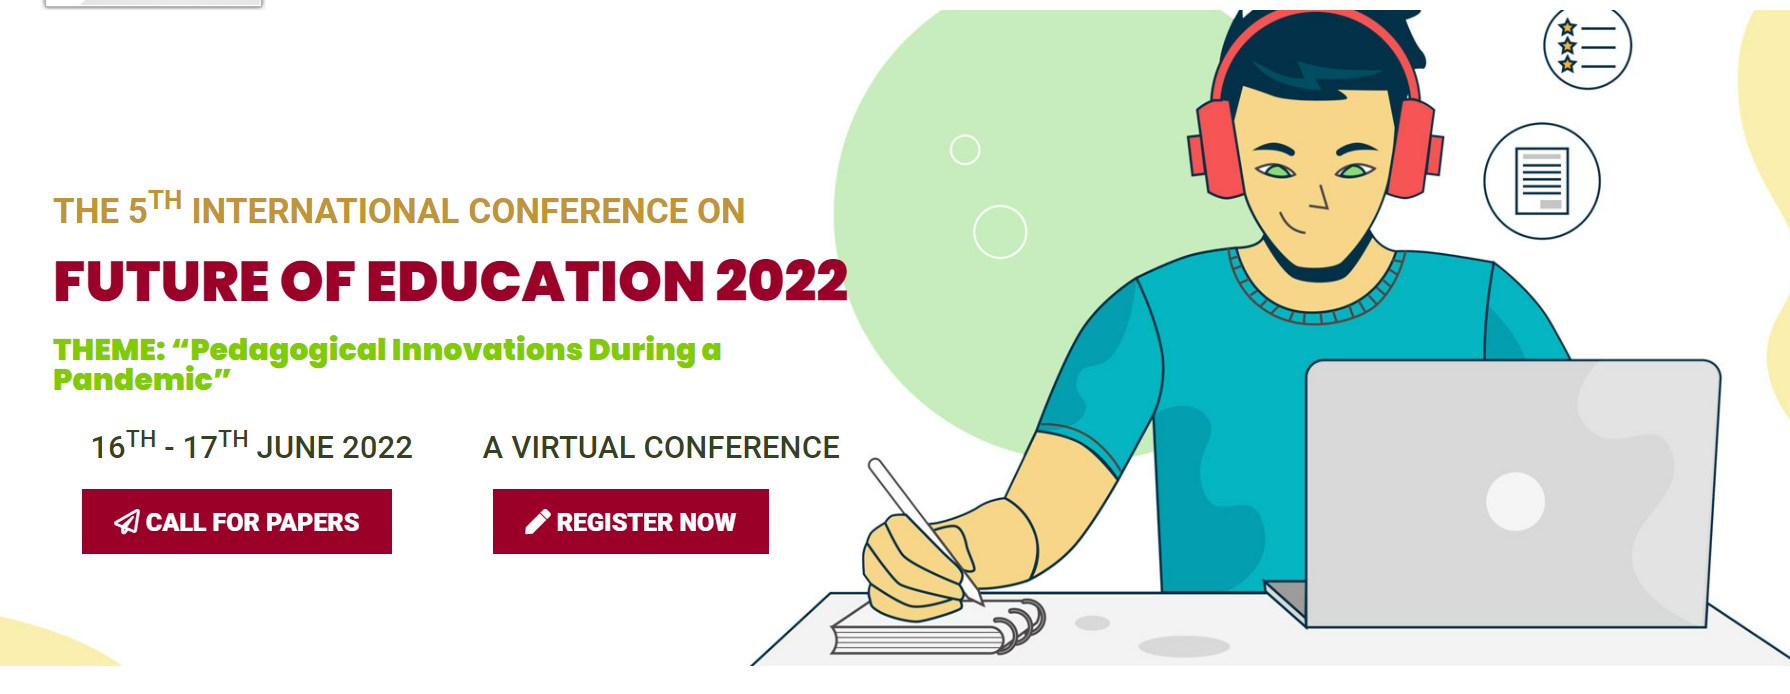 History 2022 The 7th International Conference on Future of Education 2024